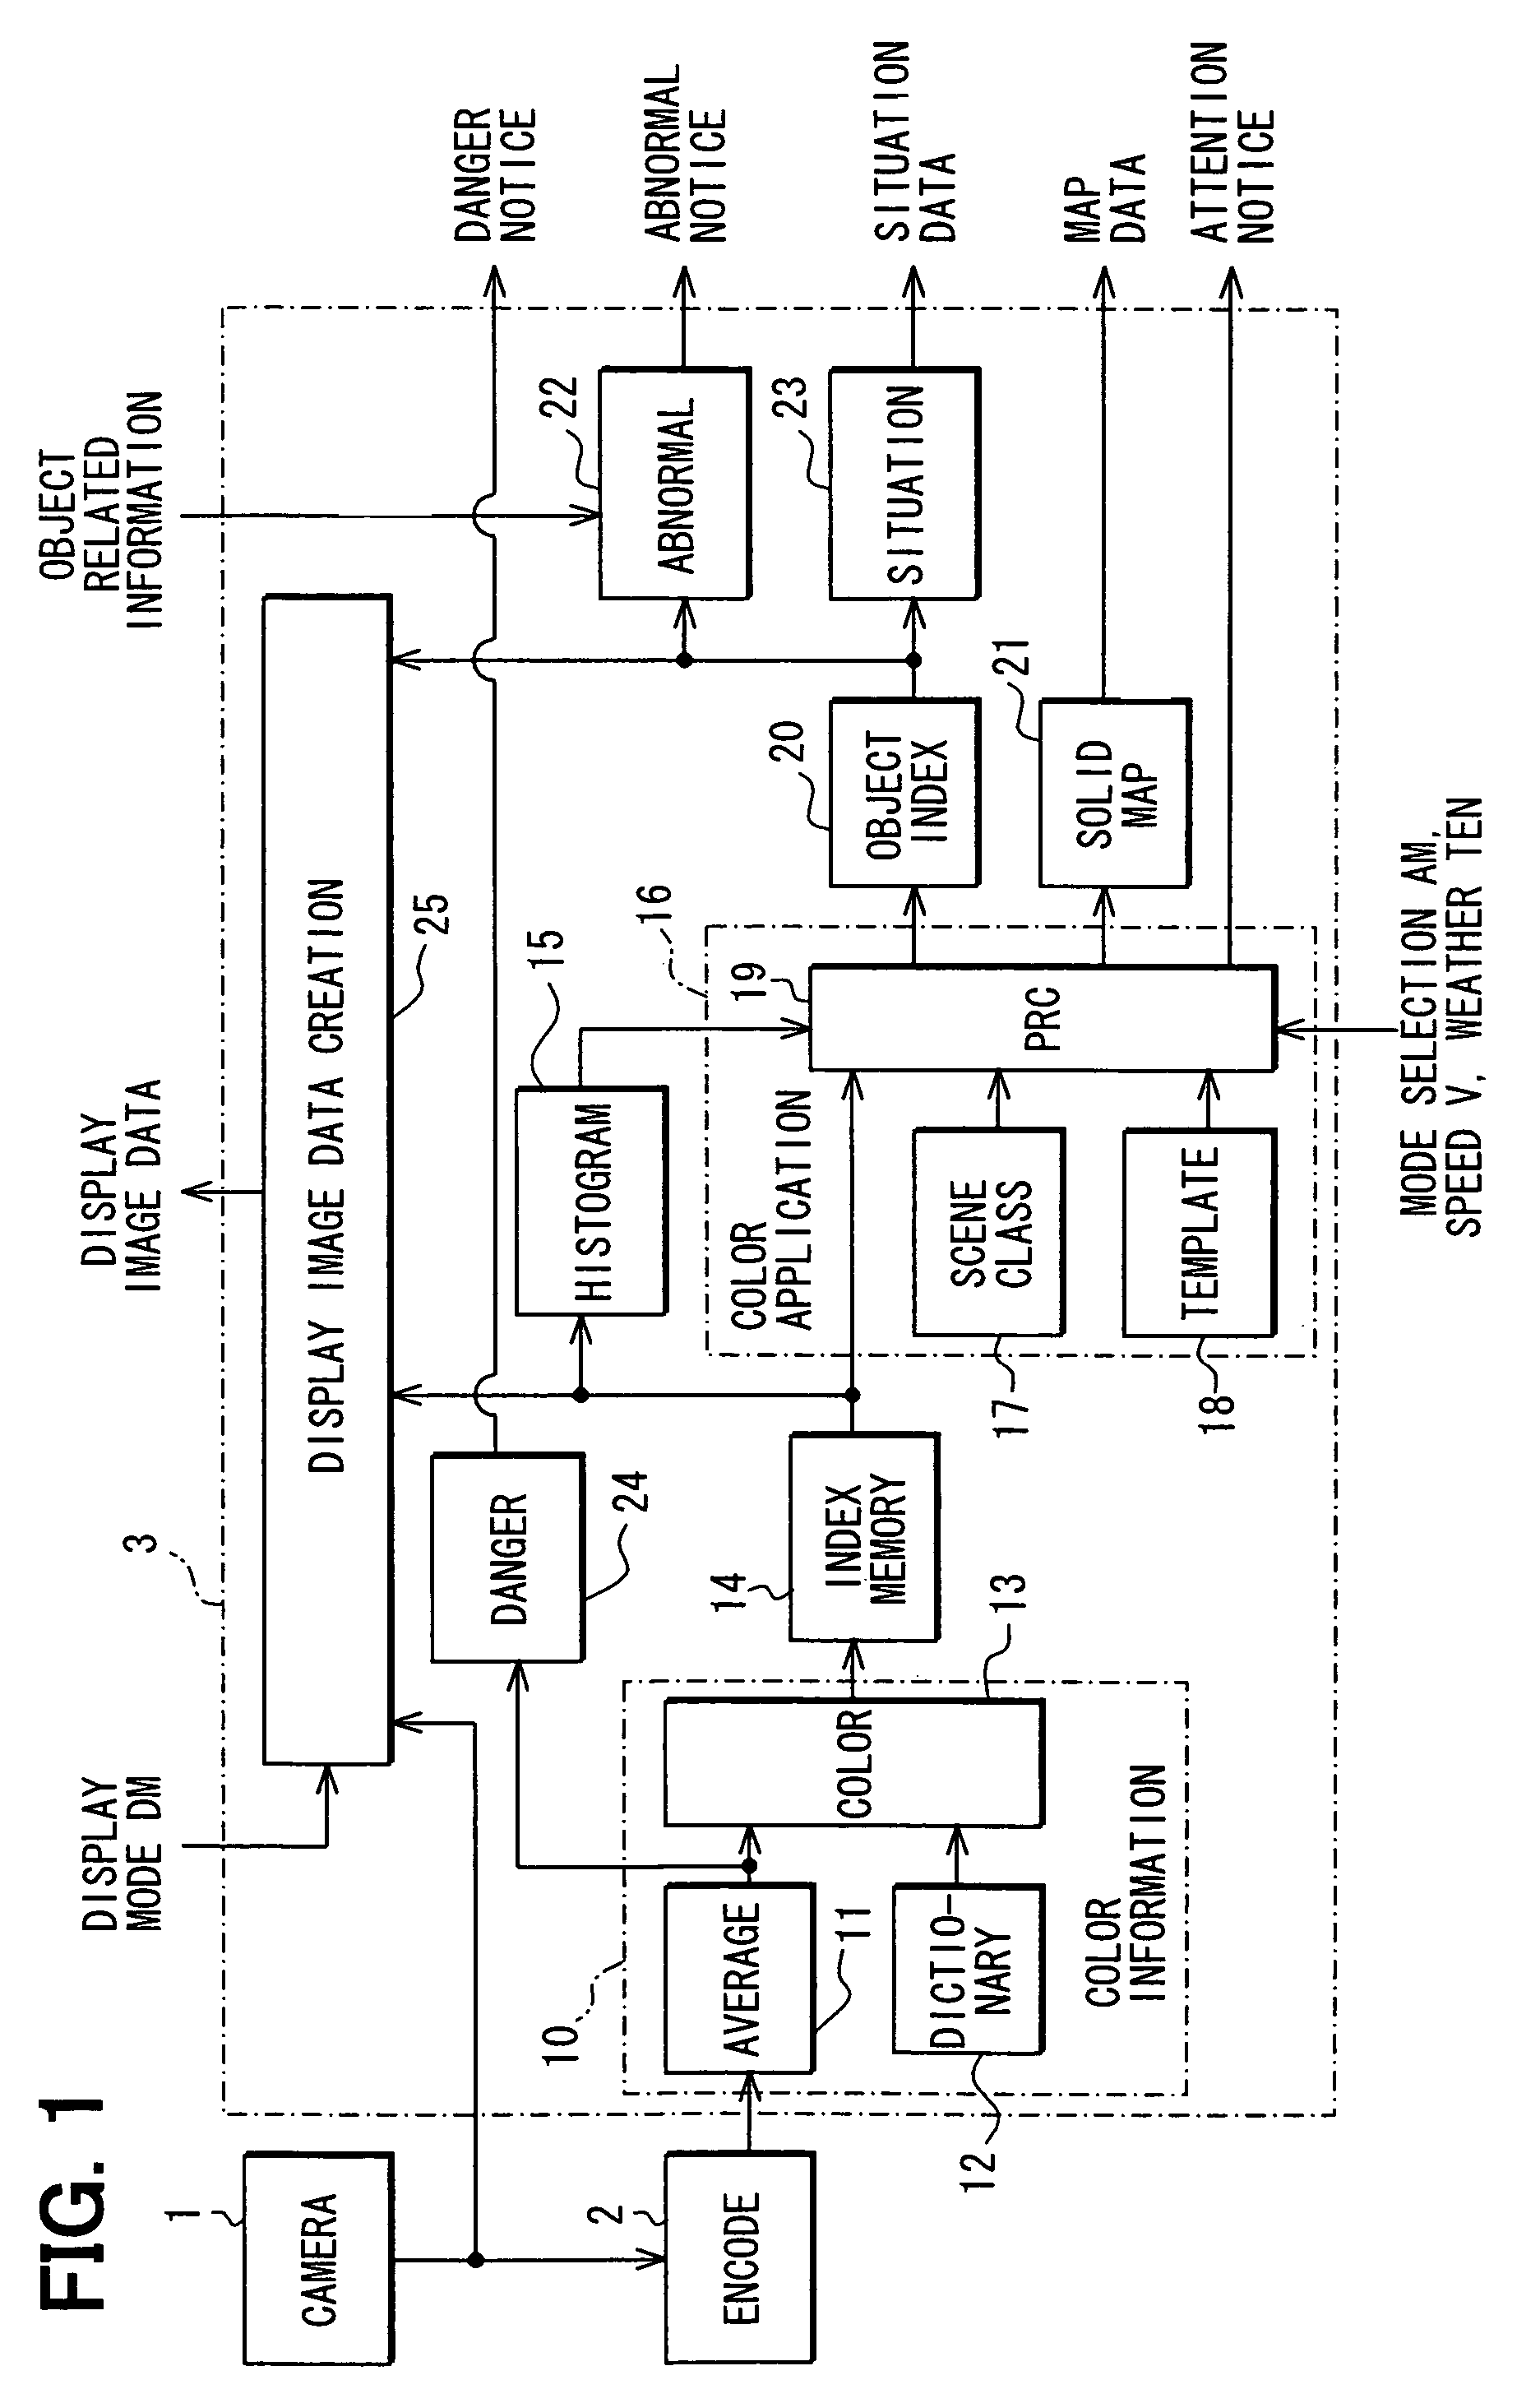 Environment recognition device